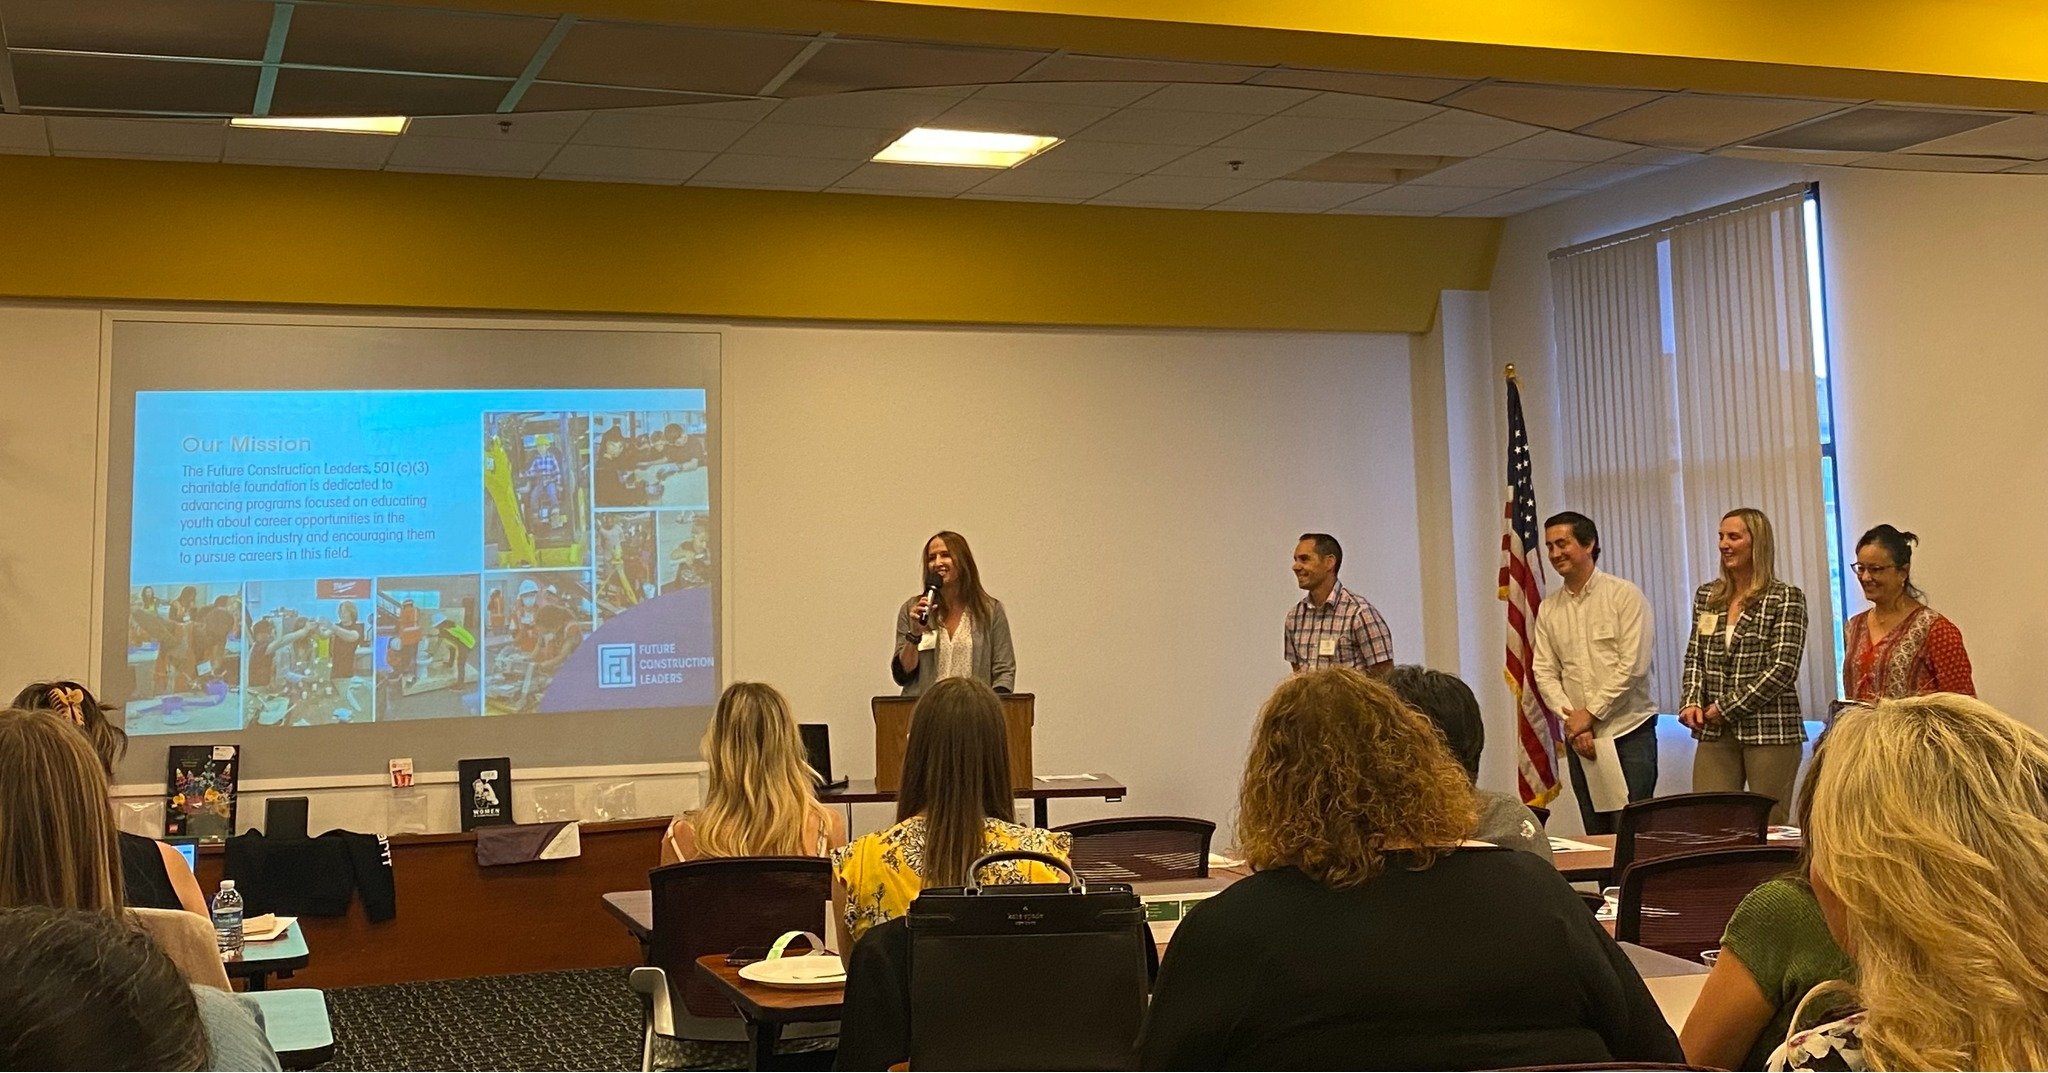 The Future Construction Leaders (FCL) Board had a great time presenting at the @nawicsd_21 May General Meeting. We discussed how to find the future construction workforce and the importance of investing in educating youth about careers in constructio